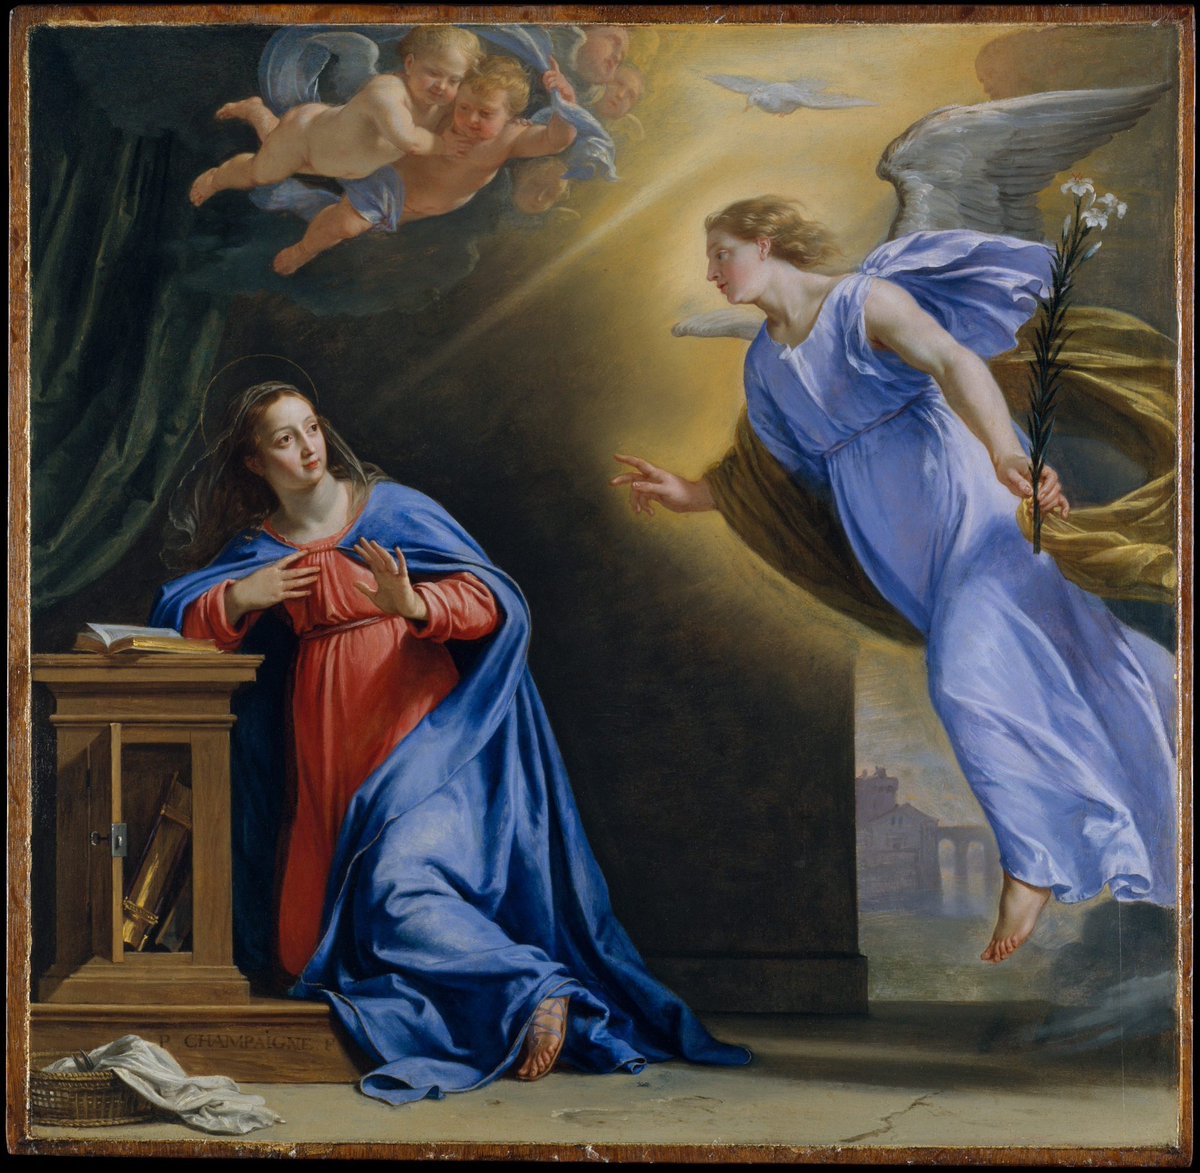 May is the Month of Mary…

#Annunciation images 

#May #MonthOfMary
#art #artandfaith #Catholic #Christian #OurLady #MotherOfGod #HolyMary  #MotherMary #FraAngelico
#Botticelli 
#LeonardodaVinci
#Caravaggio

Annunciation Paintings – 13 Most Famous
artst.org/annunciation-p…